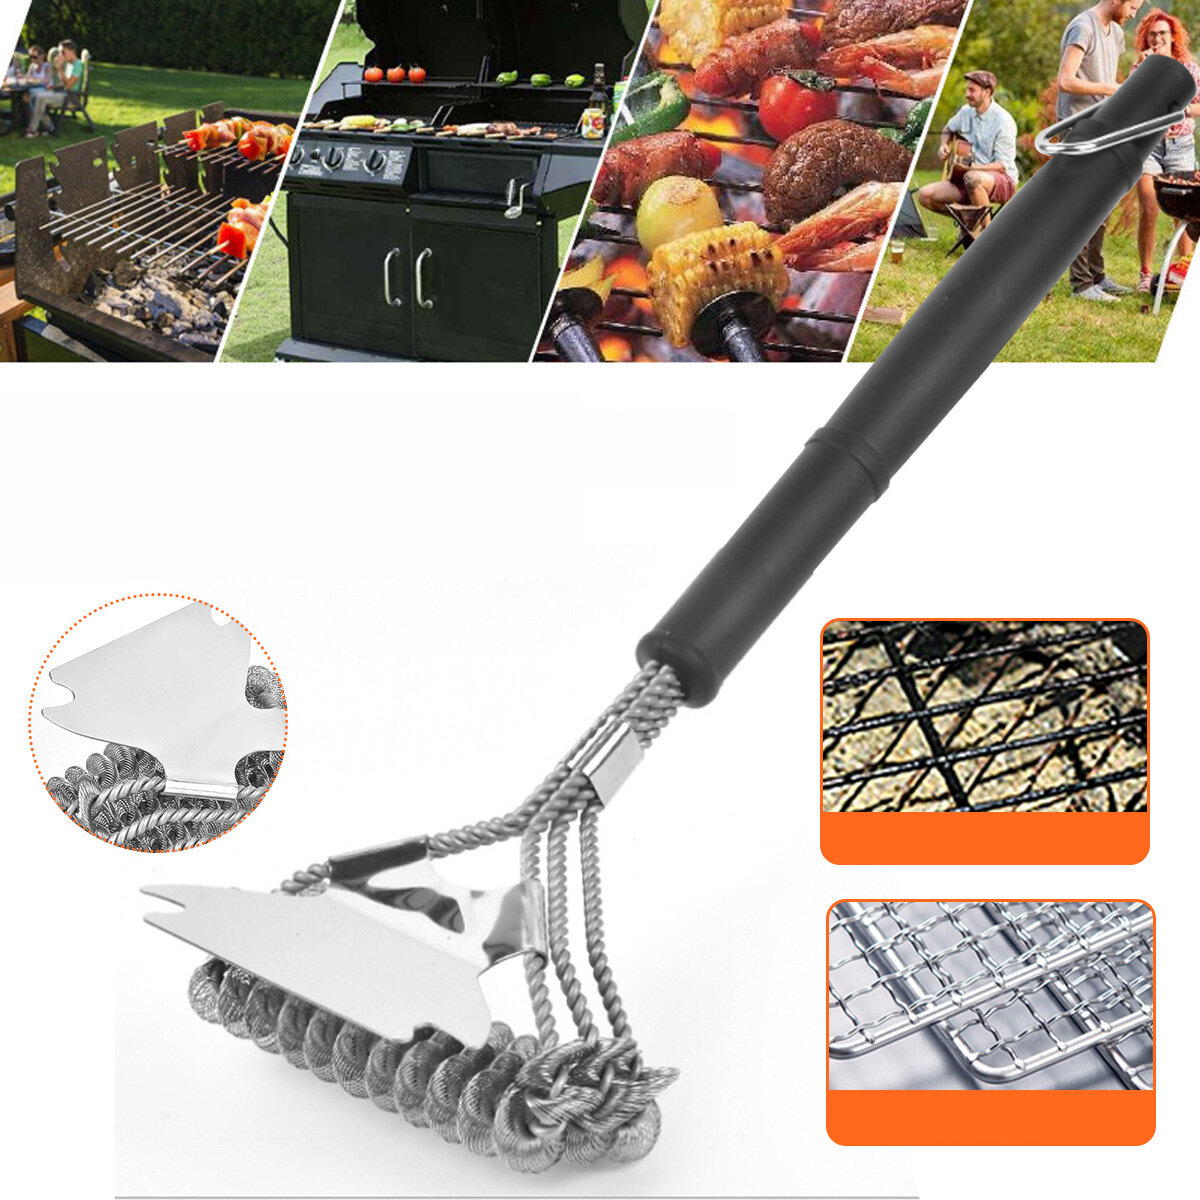 2 In 1 BBQ Grill Brush Stainless Steel Wire Barbecue Cleaning Tool Camping Picnic Tableware